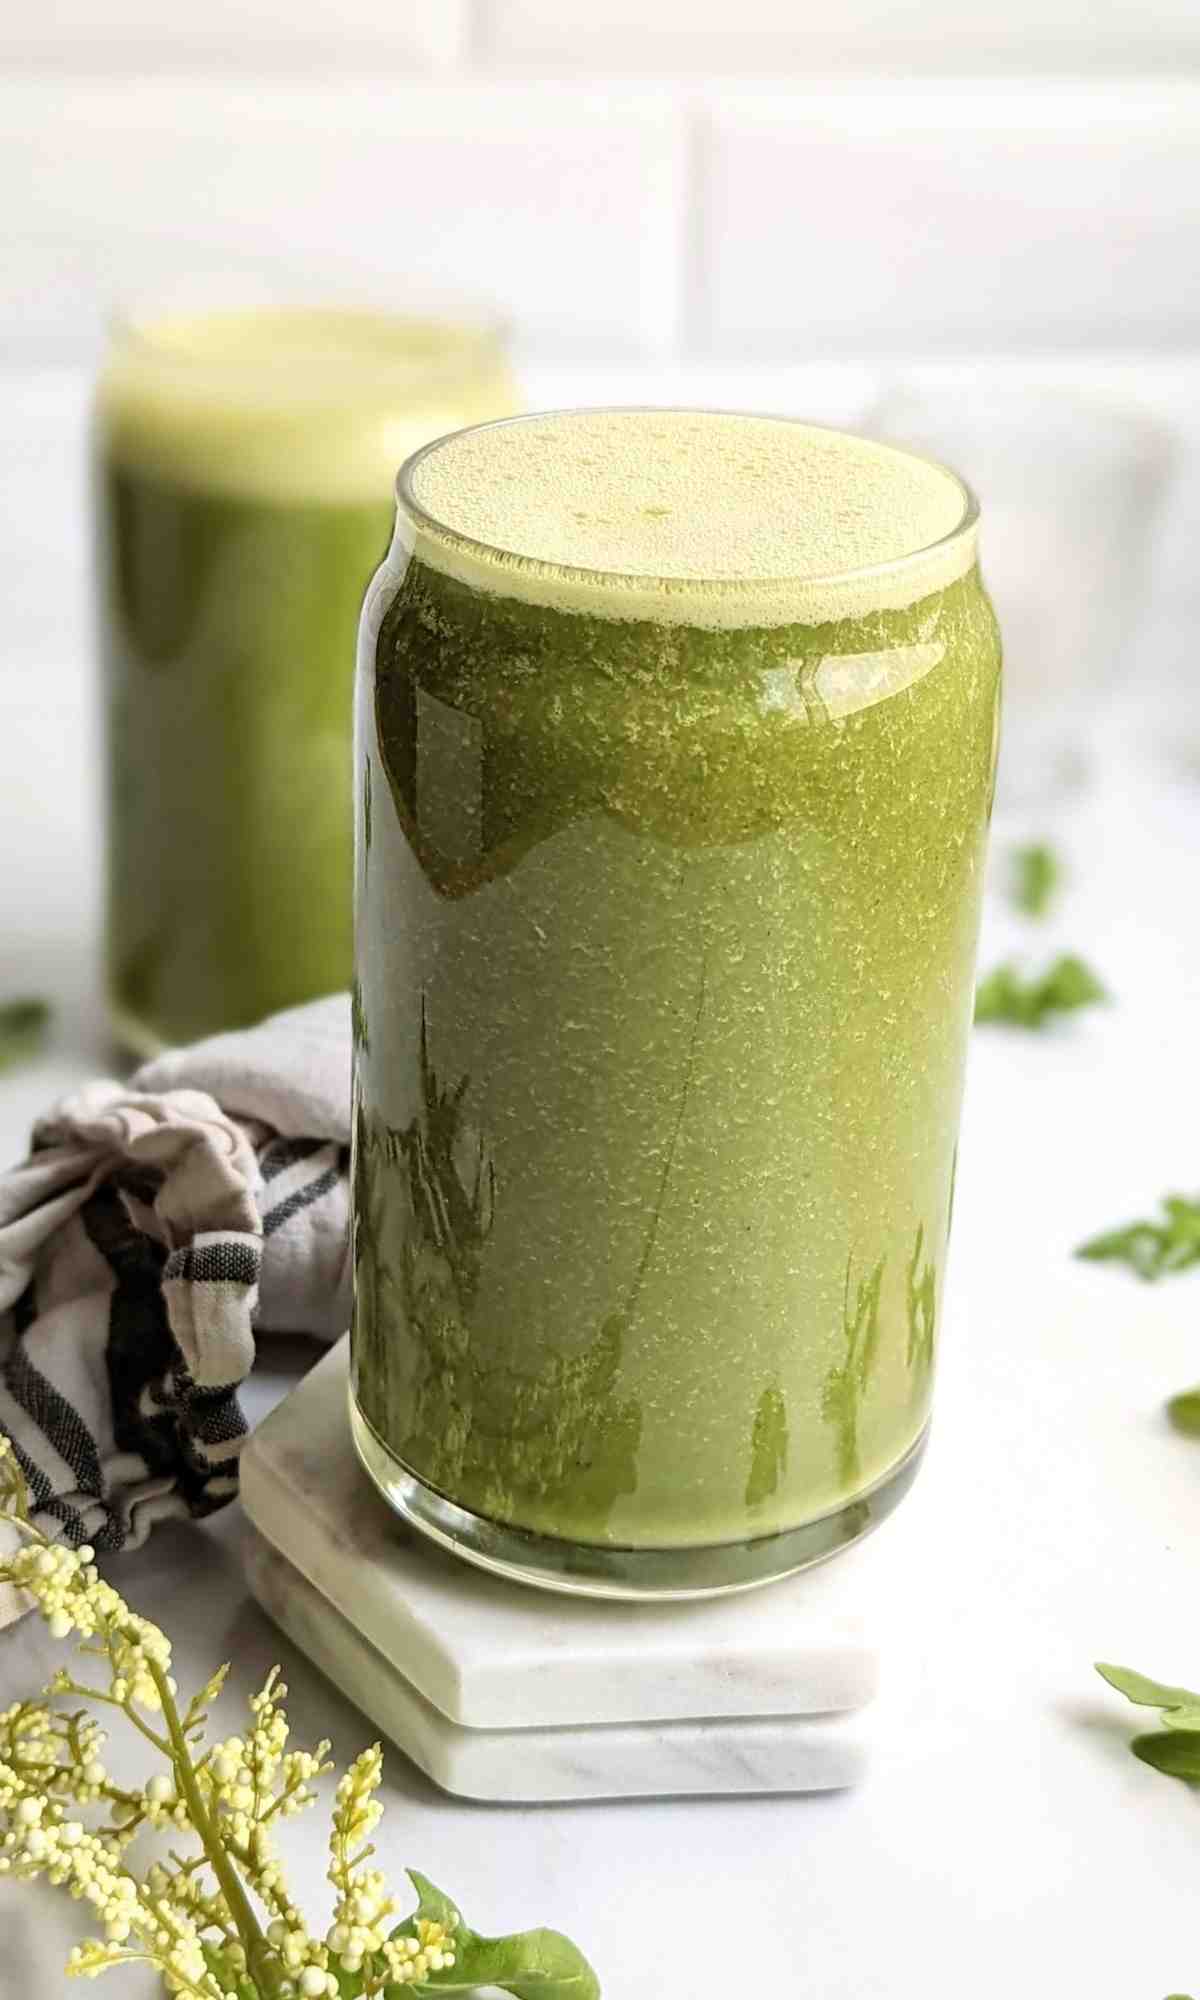 smoothie with rocket easy spring greens arugula breakfast recipes healthy vegan and vegetarian arugula recipes one of the best ways to use arugula.